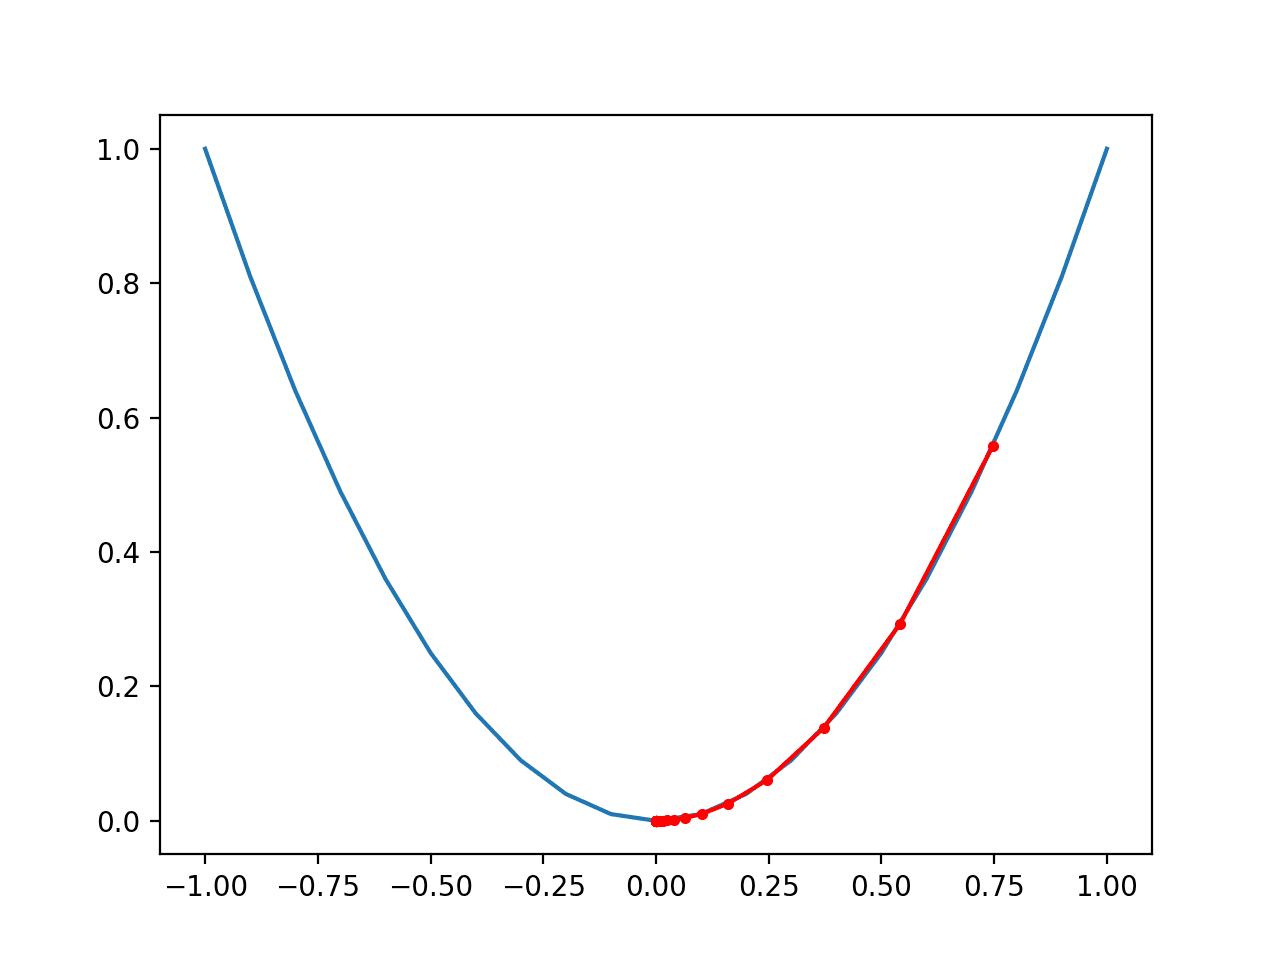 Plot of the Progress of Gradient Descent With Momentum on a One Dimensional Objective Function